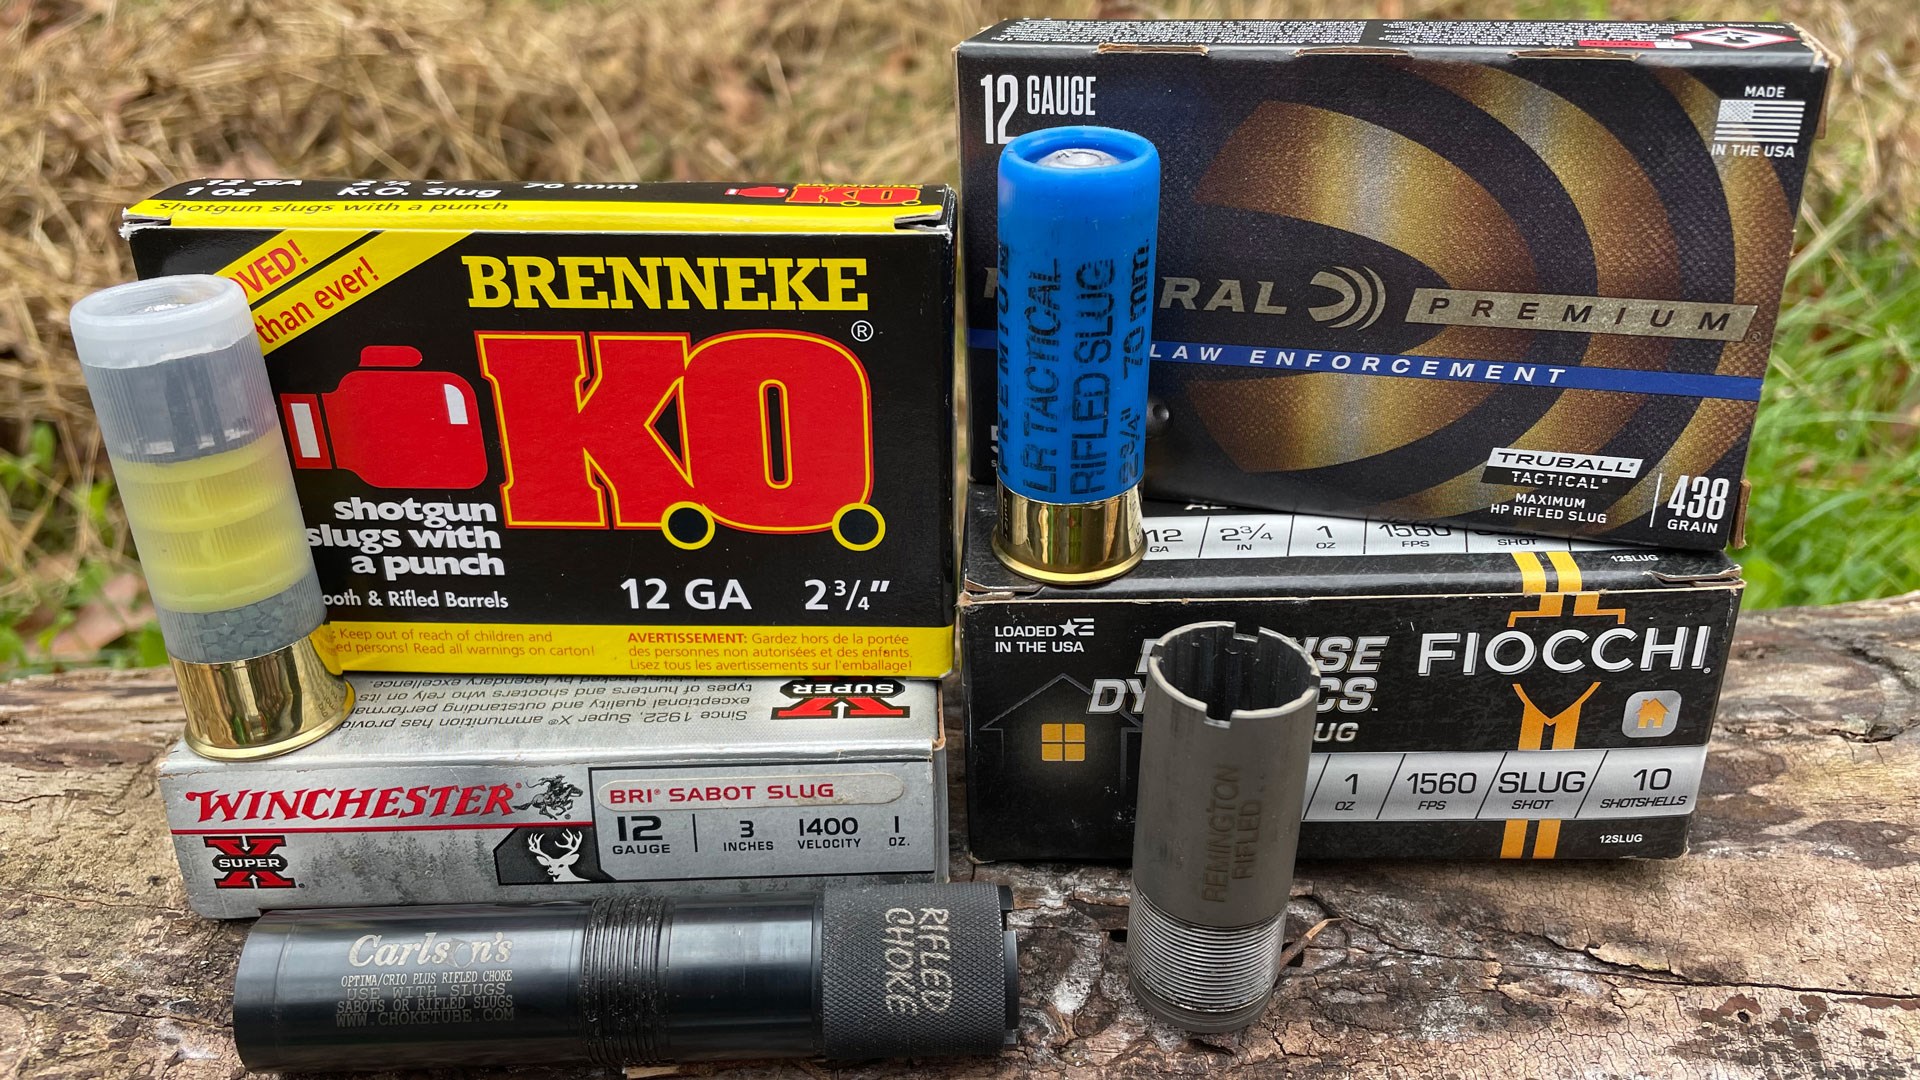 Different brands of rifled slugs and tubes